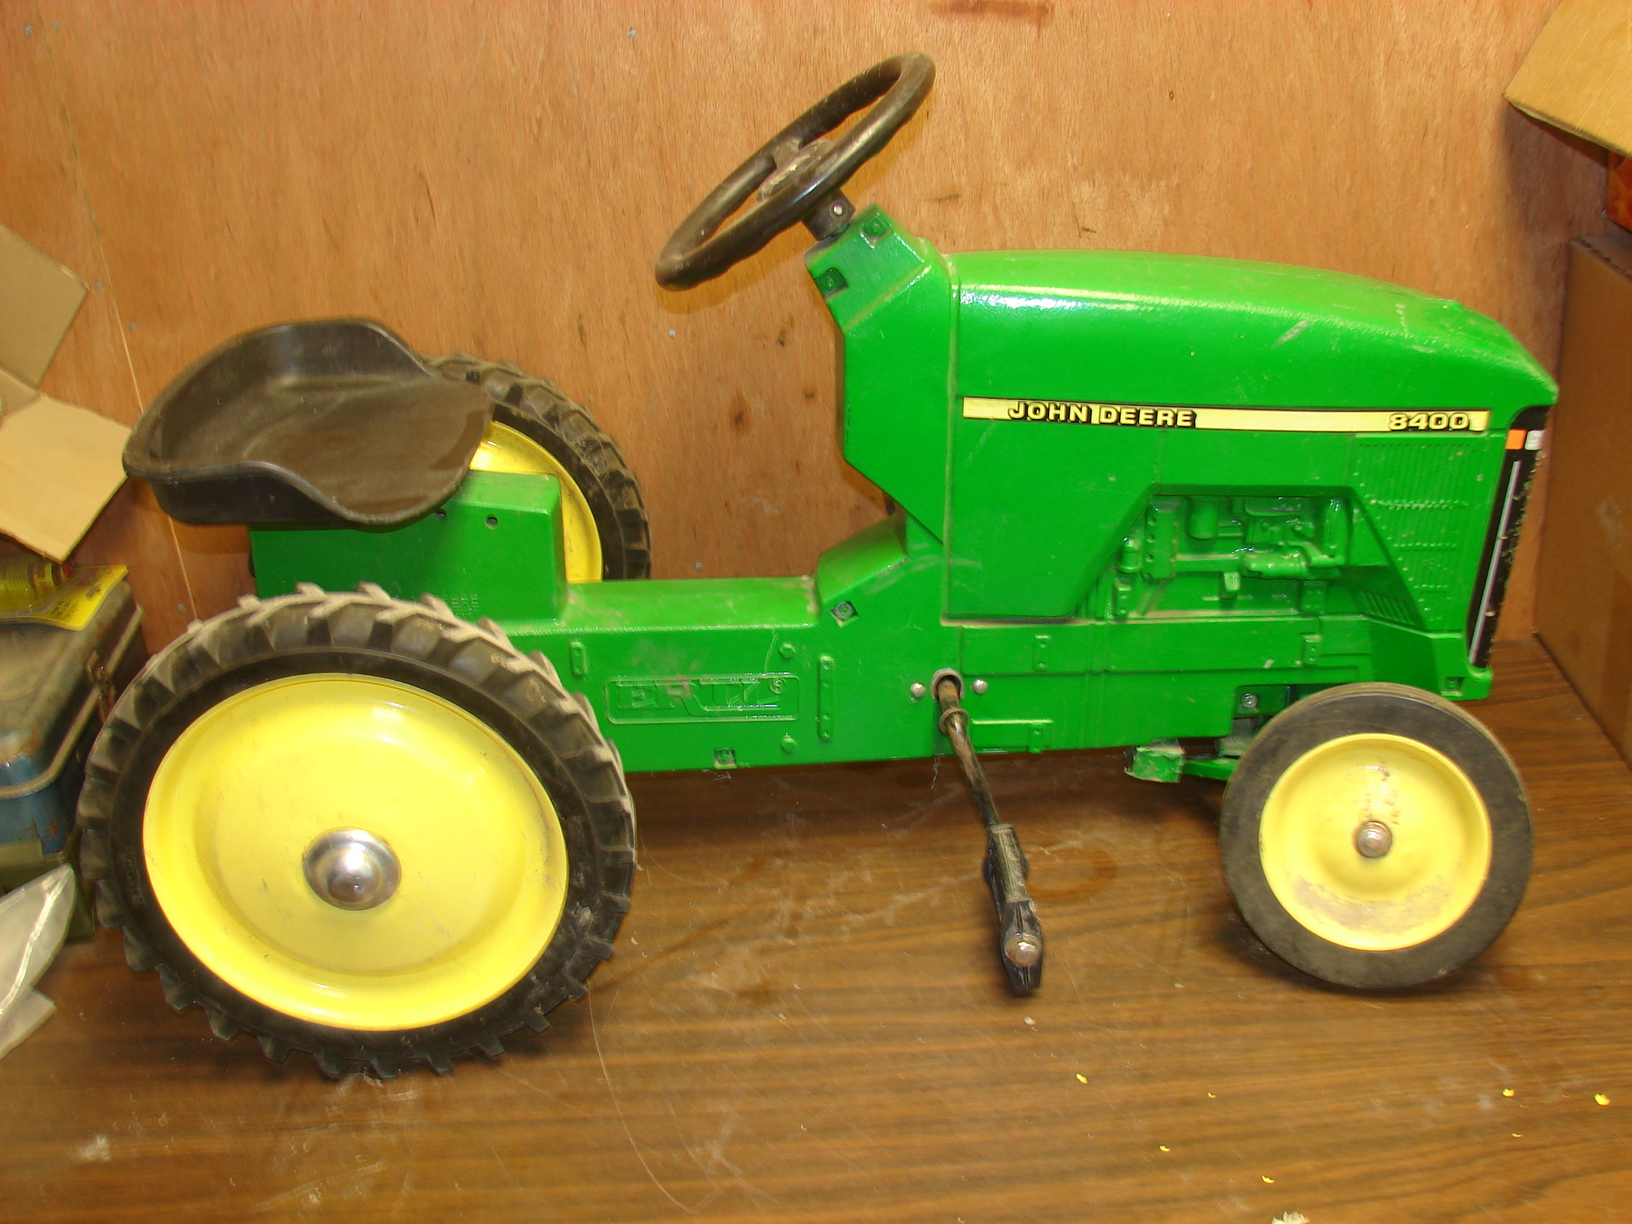 This auction is for John Deere 8400 Toy Pedal Tractor, as you can see ...